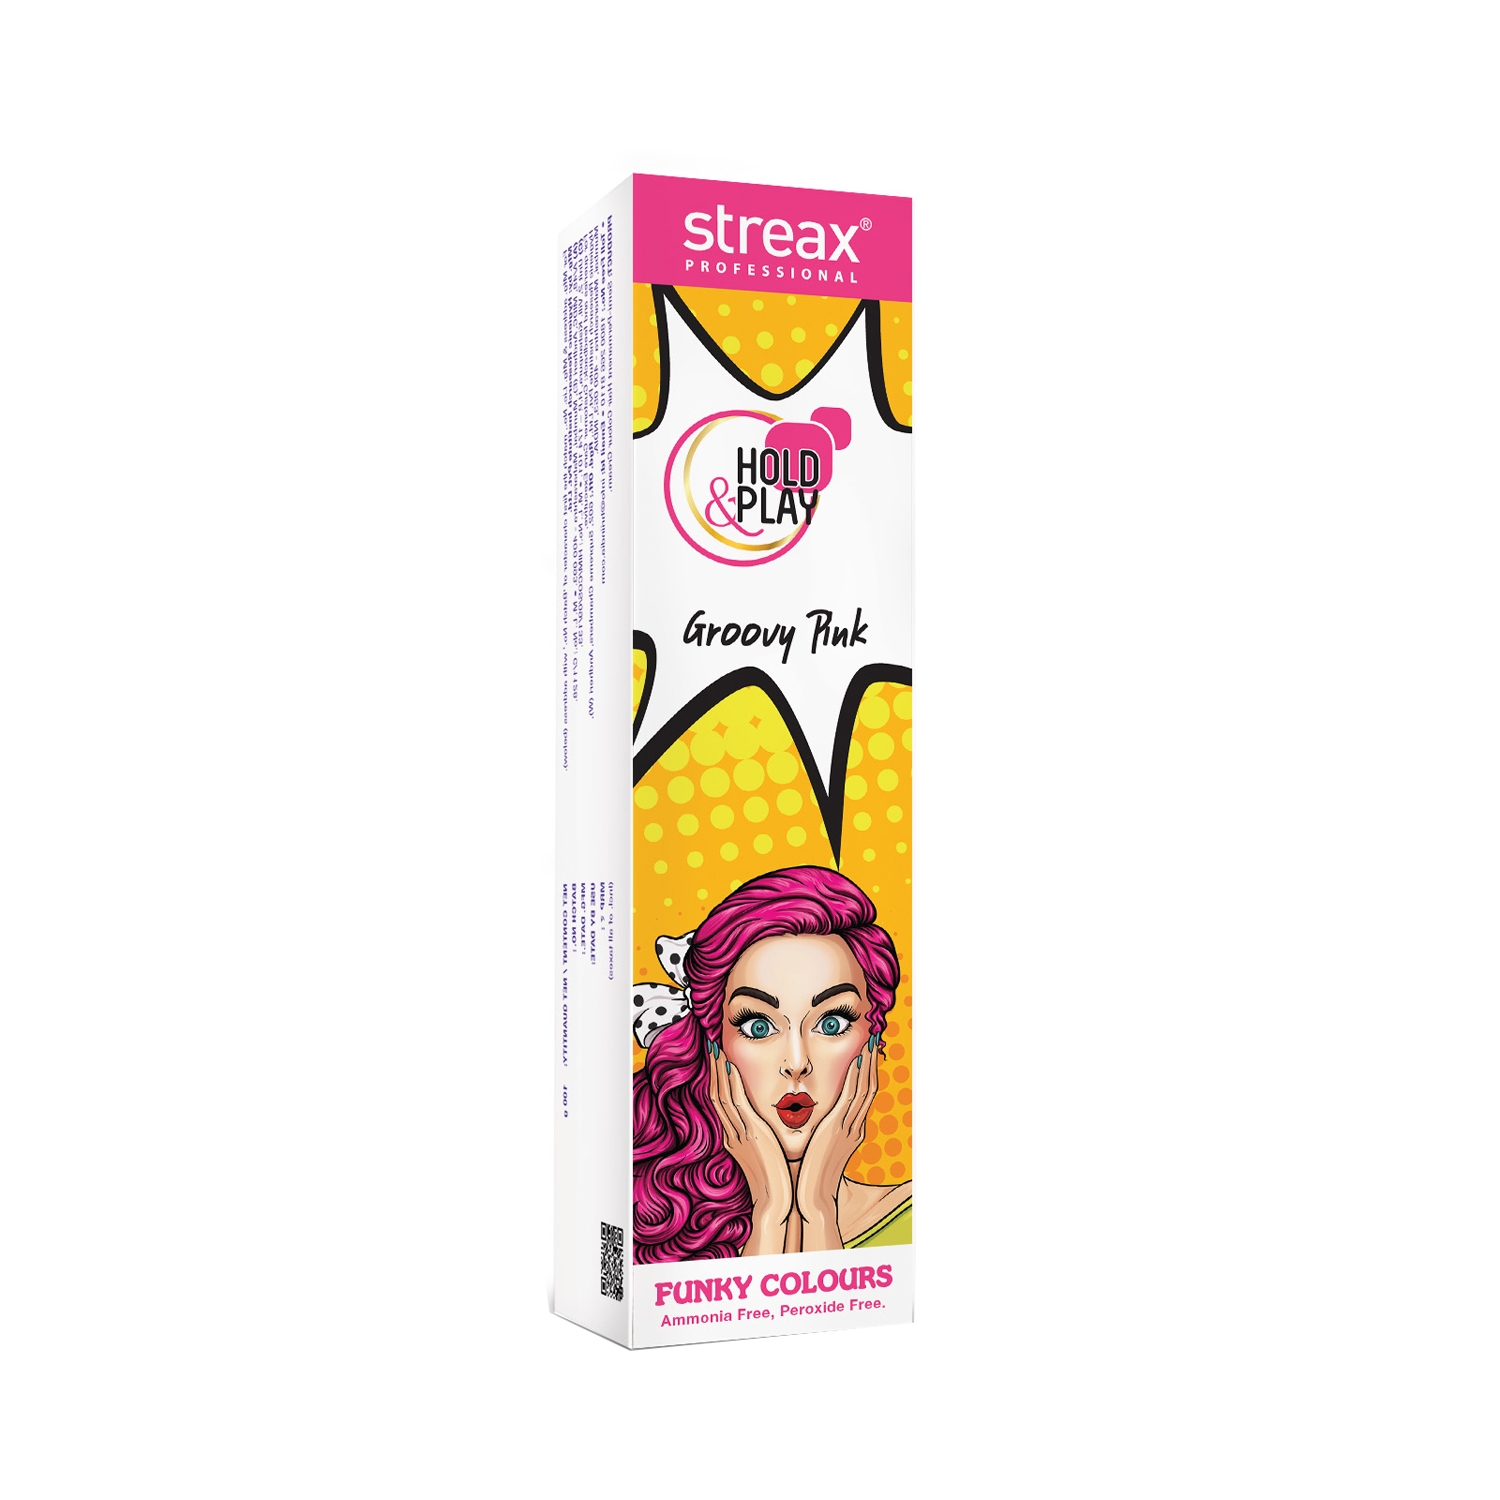 Streax Professional | Streax Professional Hold & Play Funky Hair Color - Groovy Pink (100g)